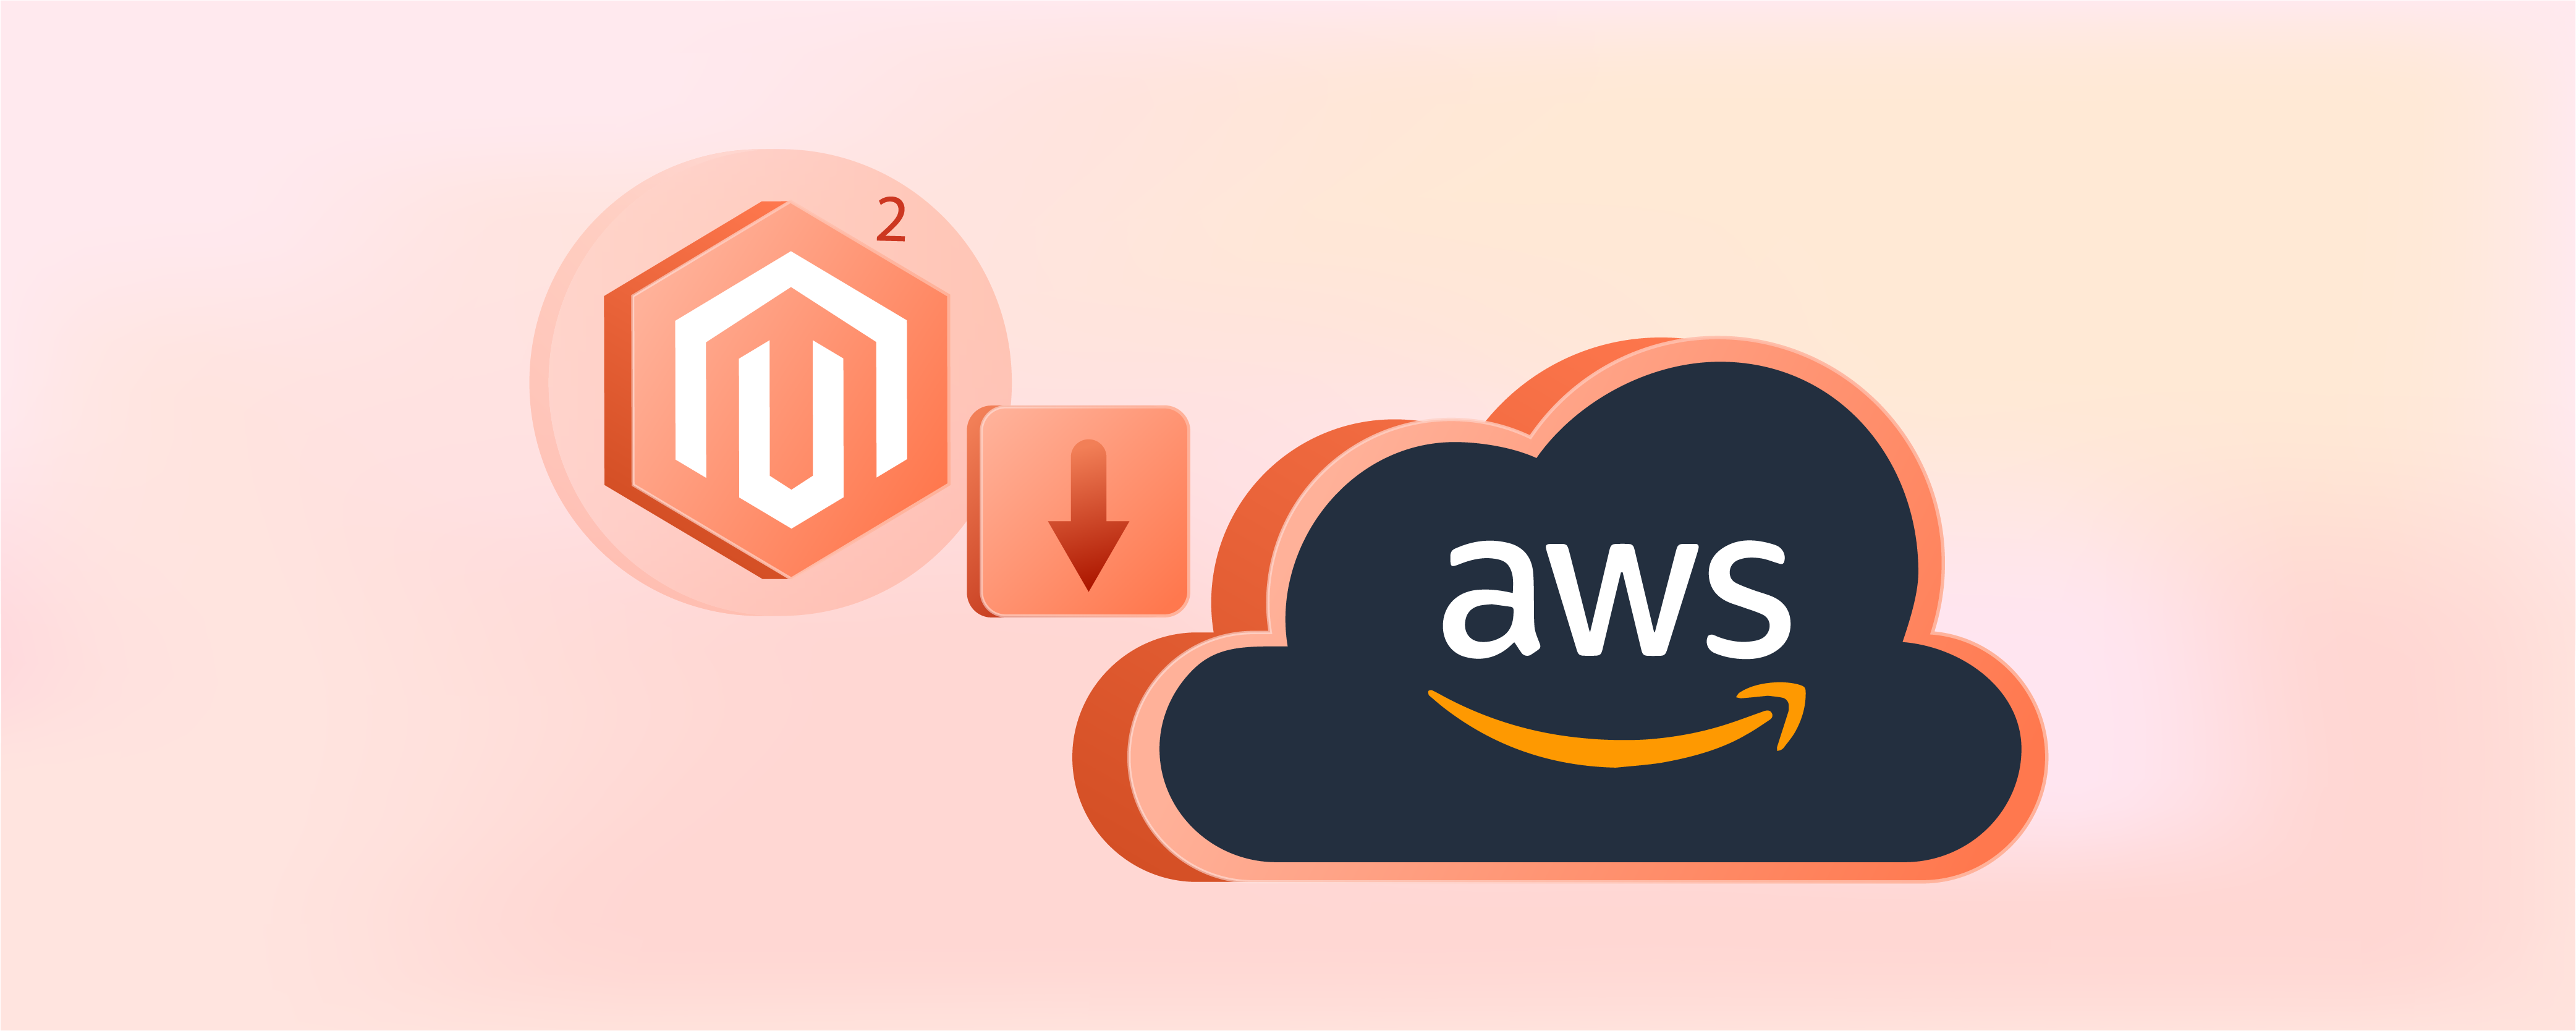 Prerequisites and Technical Requirements to Install Magento 2 on AWS